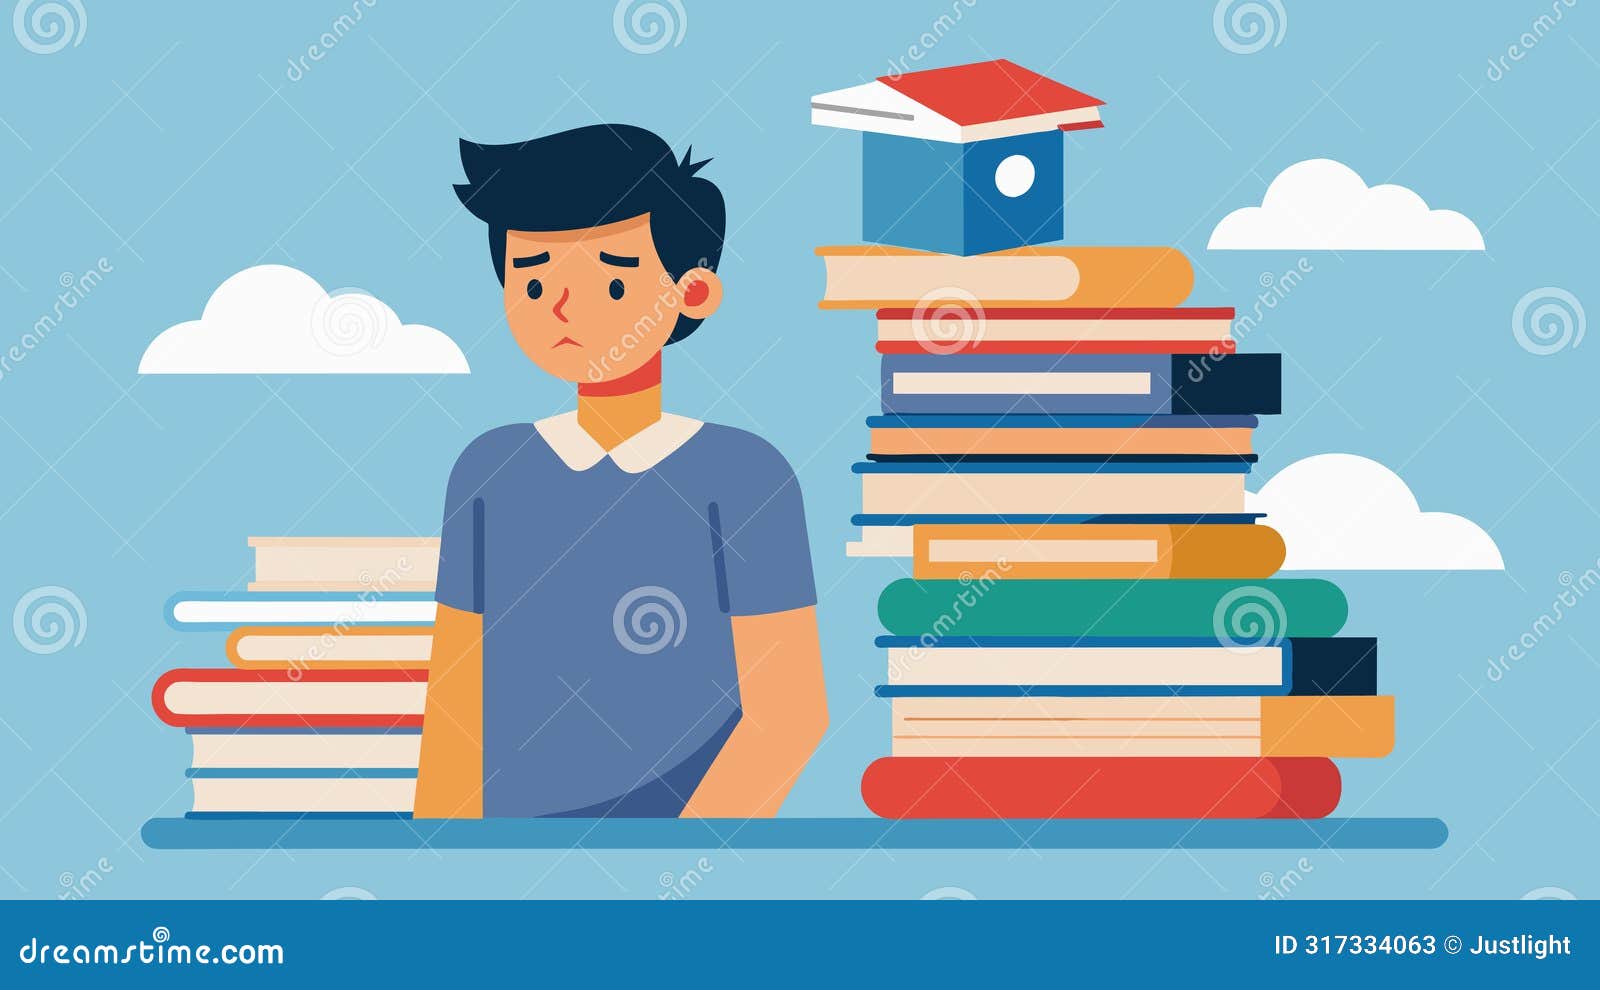 a stack of textbooks and course materials tower over an international student as they contemplate whether or not they